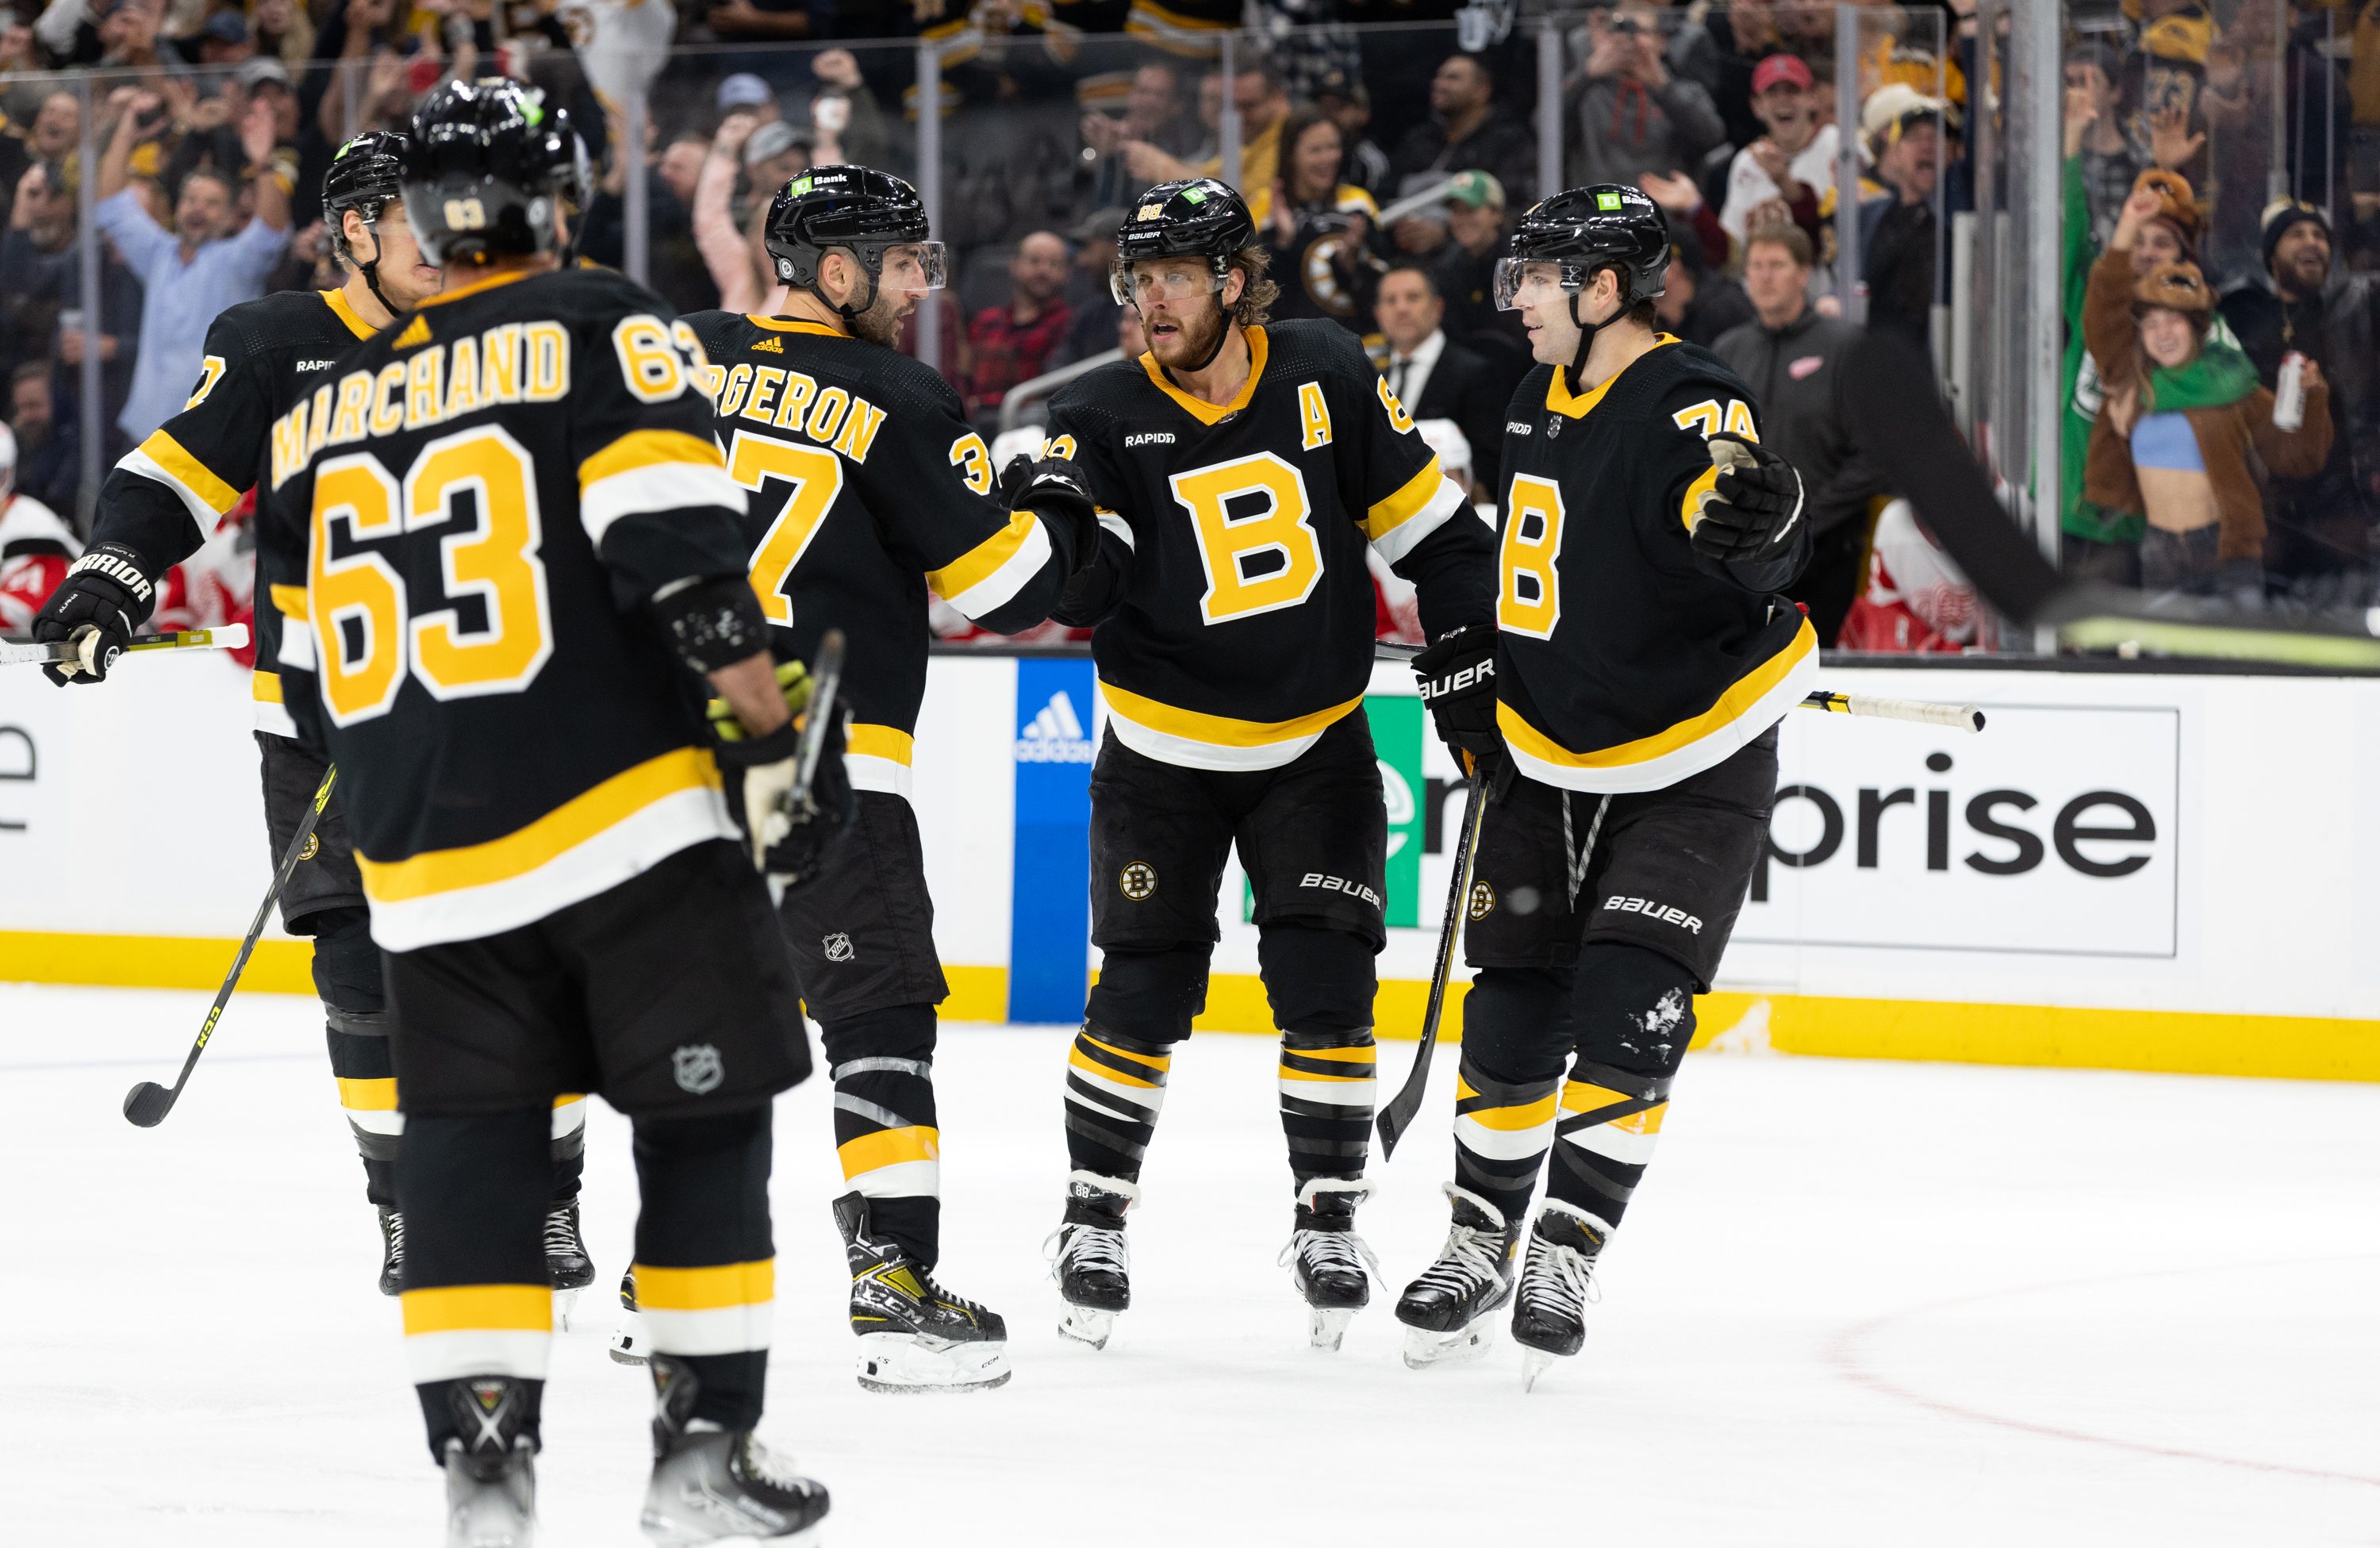 David Pastrnak of the Boston Bruins celebrates his goal against the Detroit Red Wings with his teammates Jake DeBrusk, Patrice Bergeron and Brad Marchand during the third period at the TD Garden on October 27, 2022 in Boston, Massachusetts. The Bruins won 5-1.